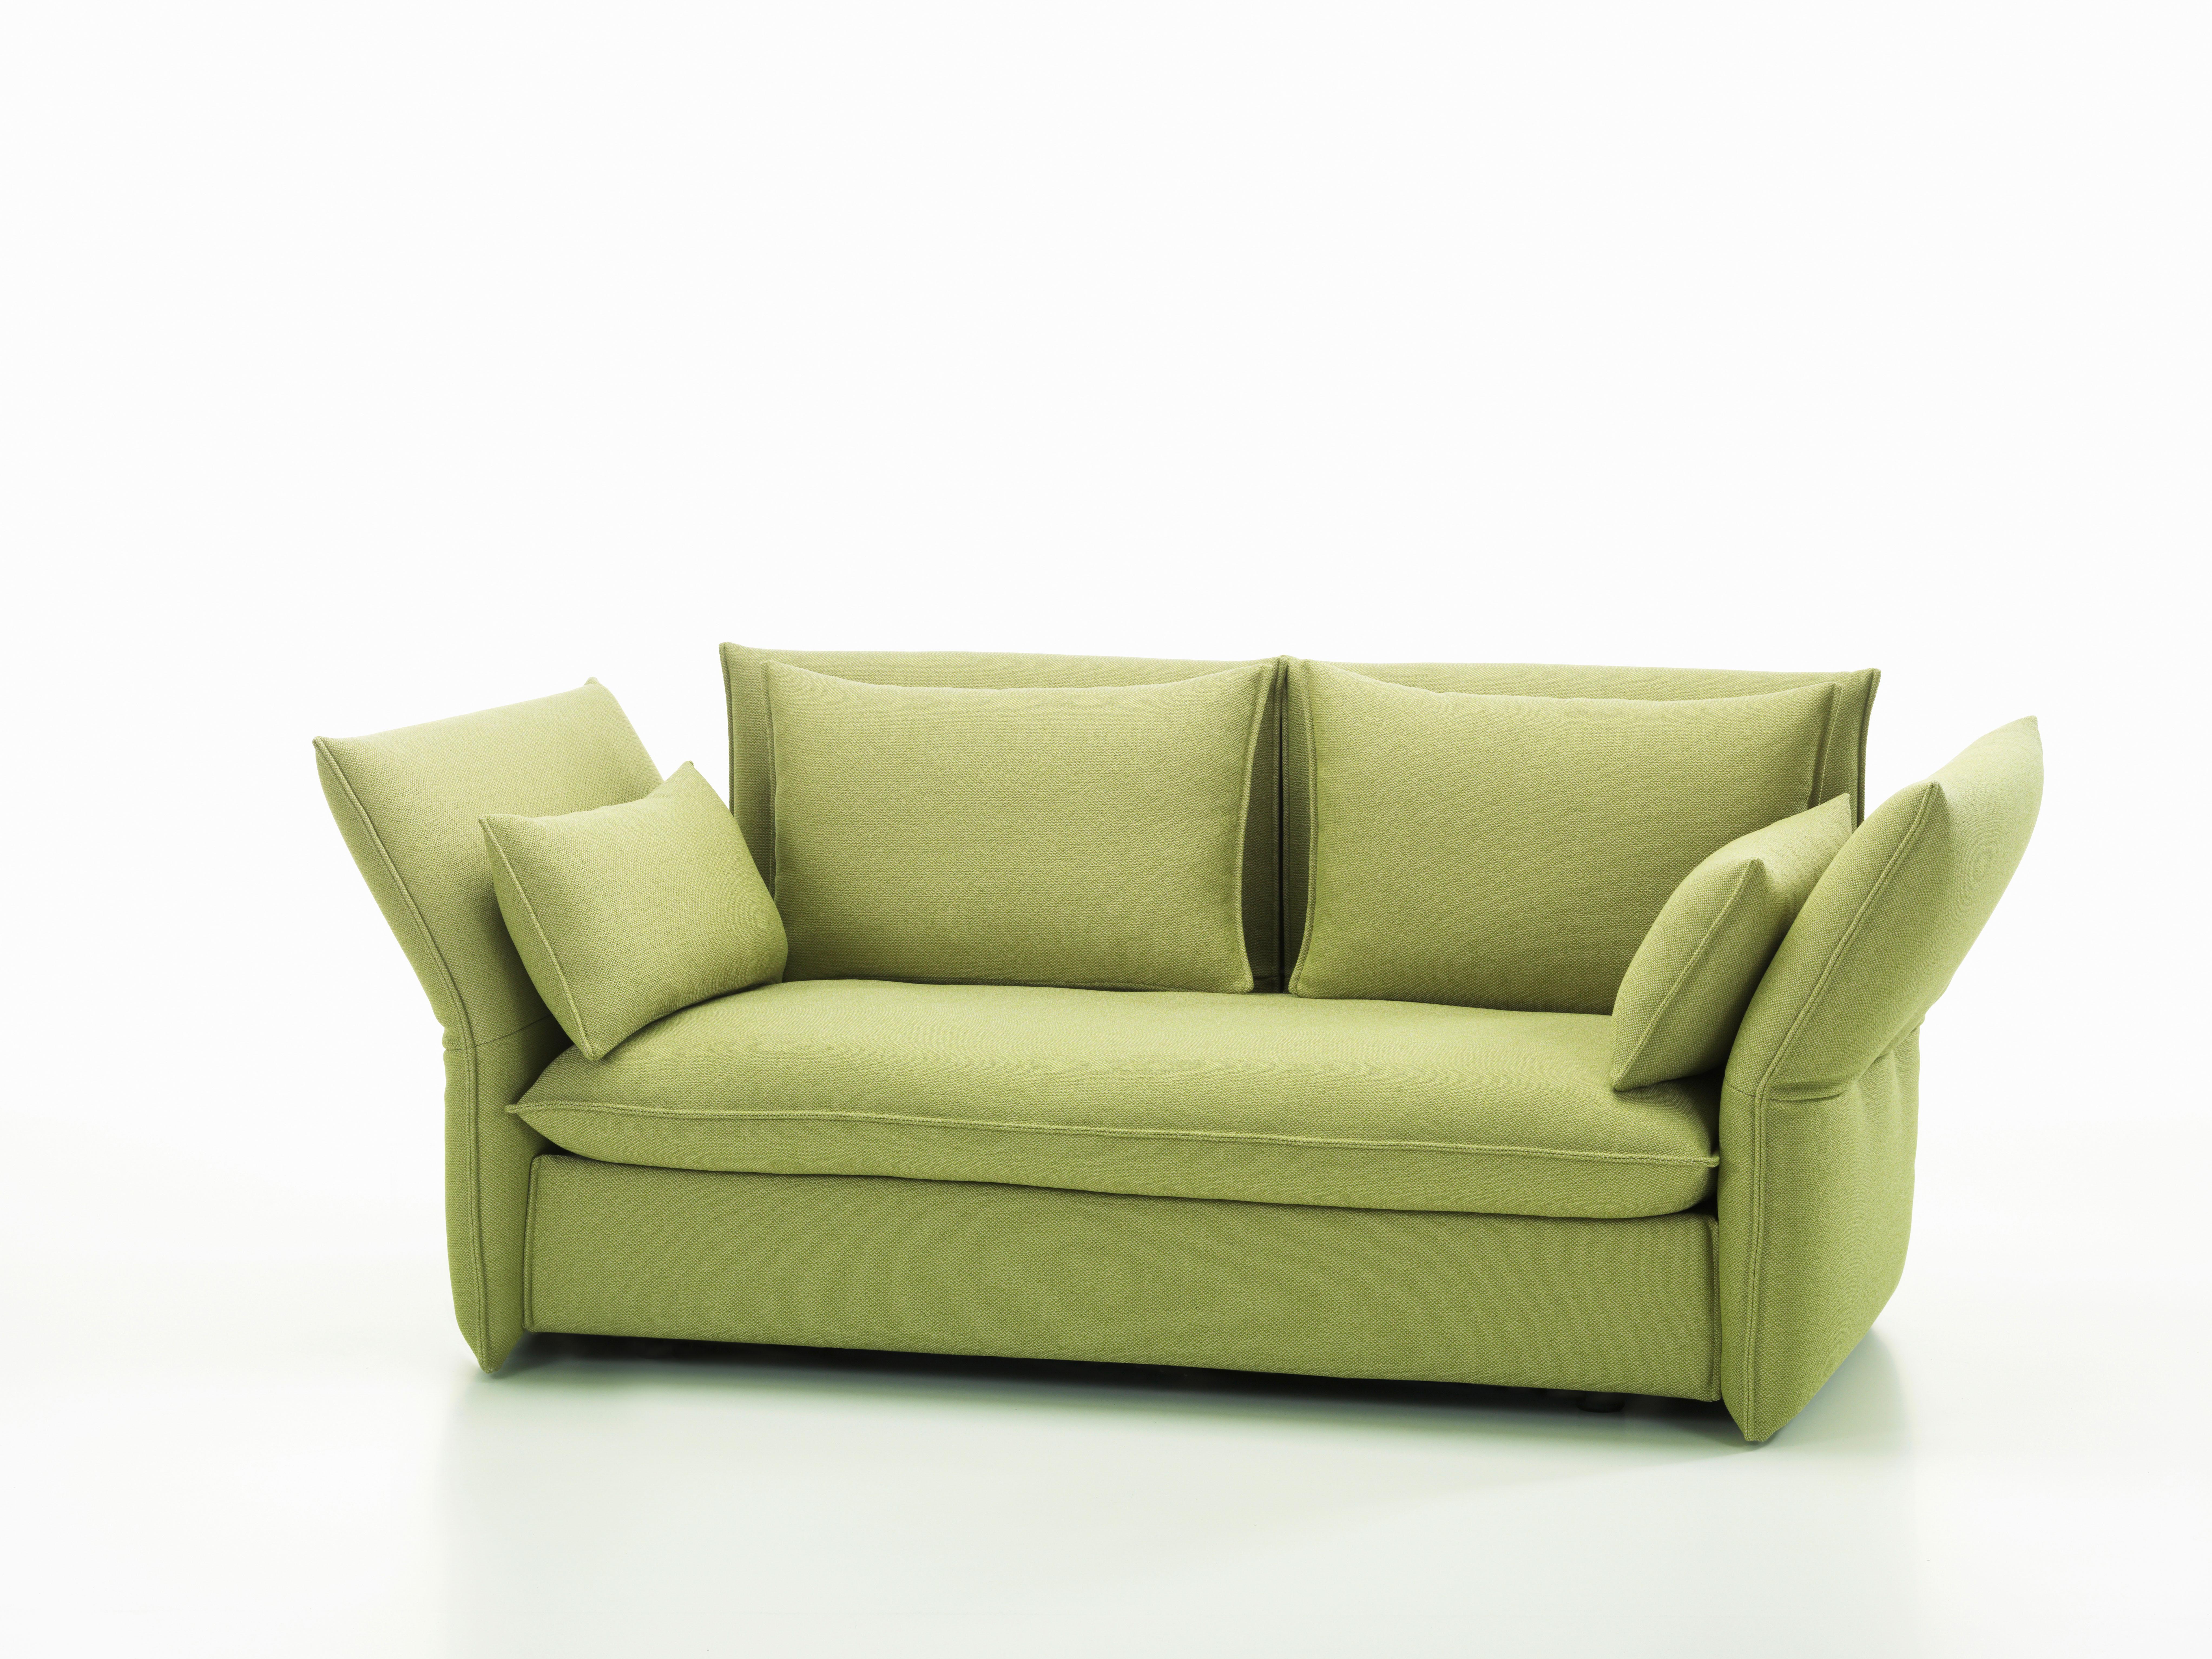 Metal Vitra Mariposa 2-Seat Sofa in Sand & Avocado Credo by Edward Barber & Jay For Sale